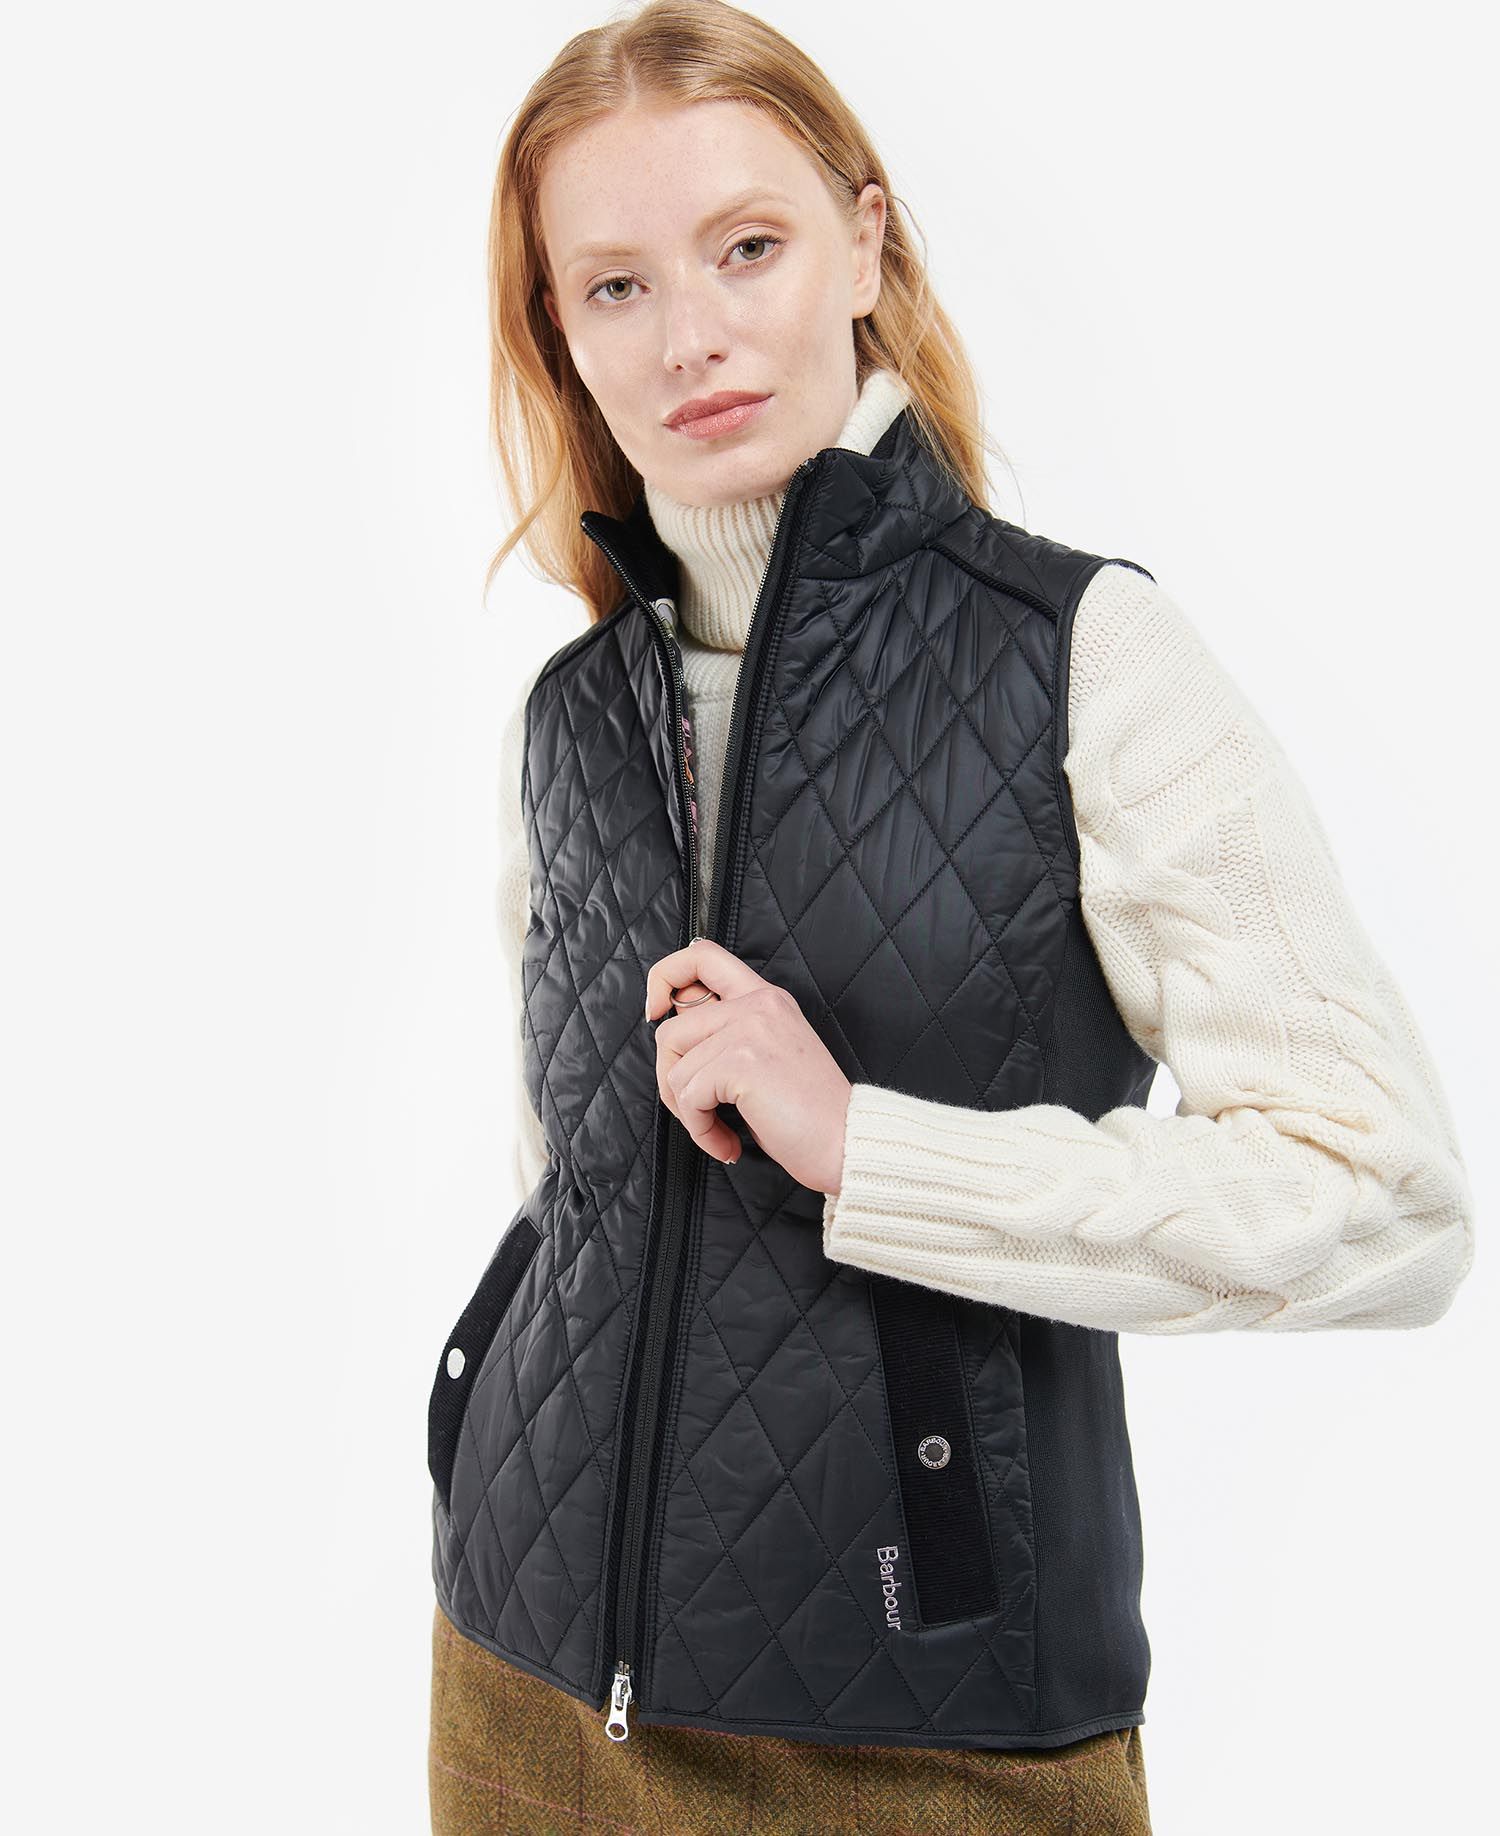 Barbour Poppy Gilet - Black/Renaissance Floral - Ruffords Country Store